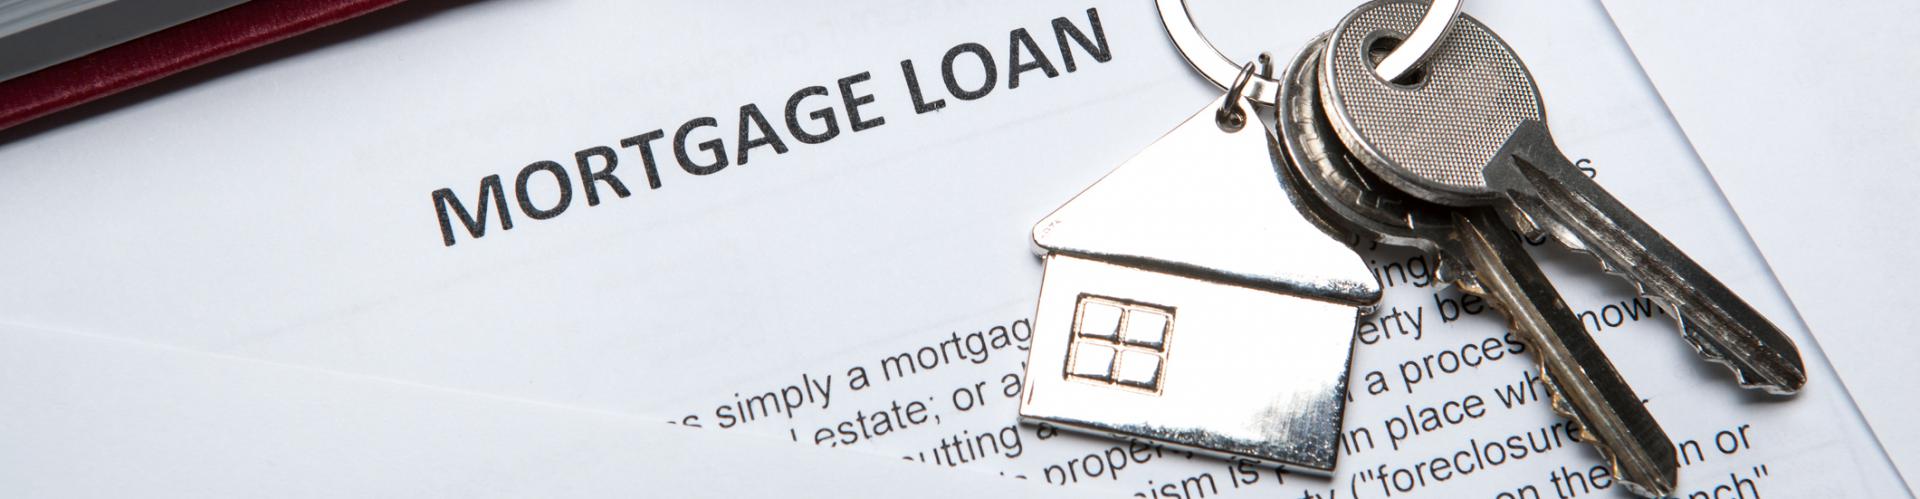 State Home Mortgage Image